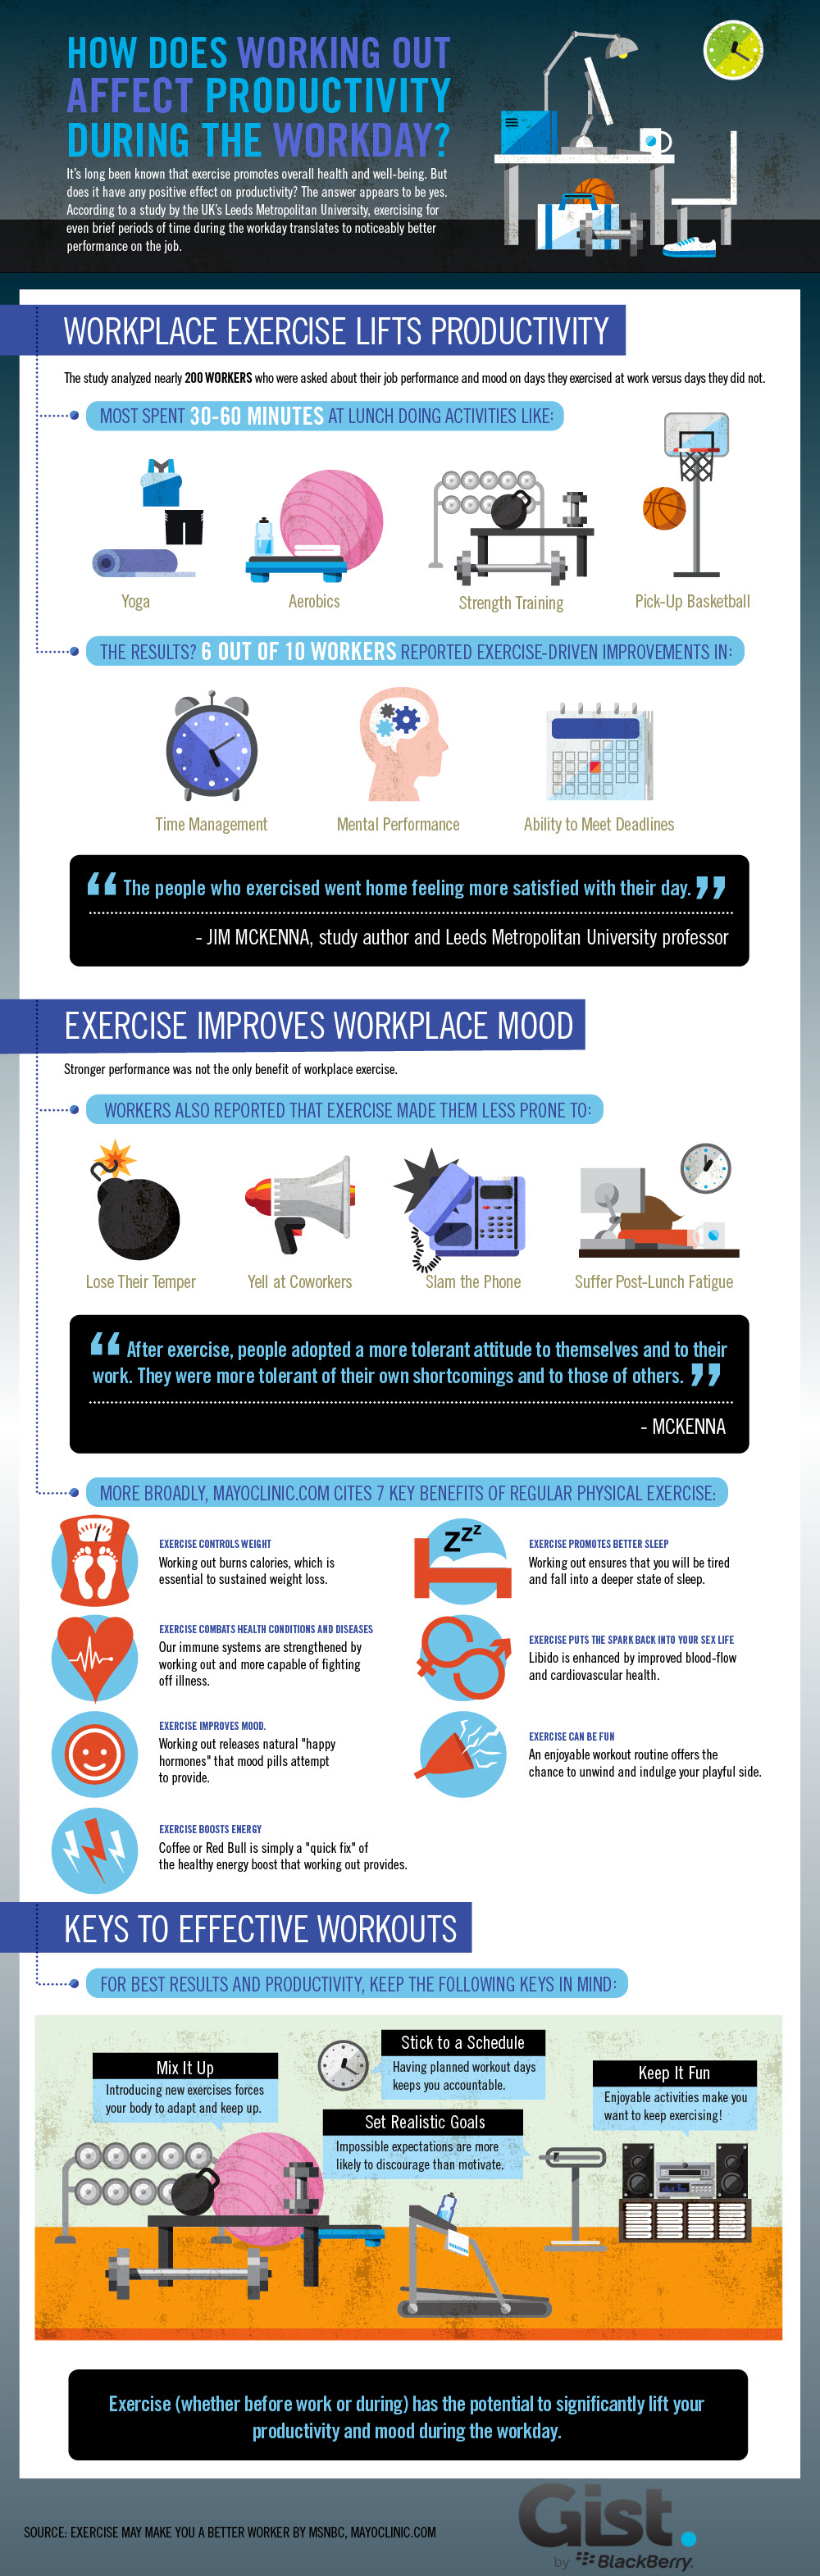 How Working Out Affects Productivity